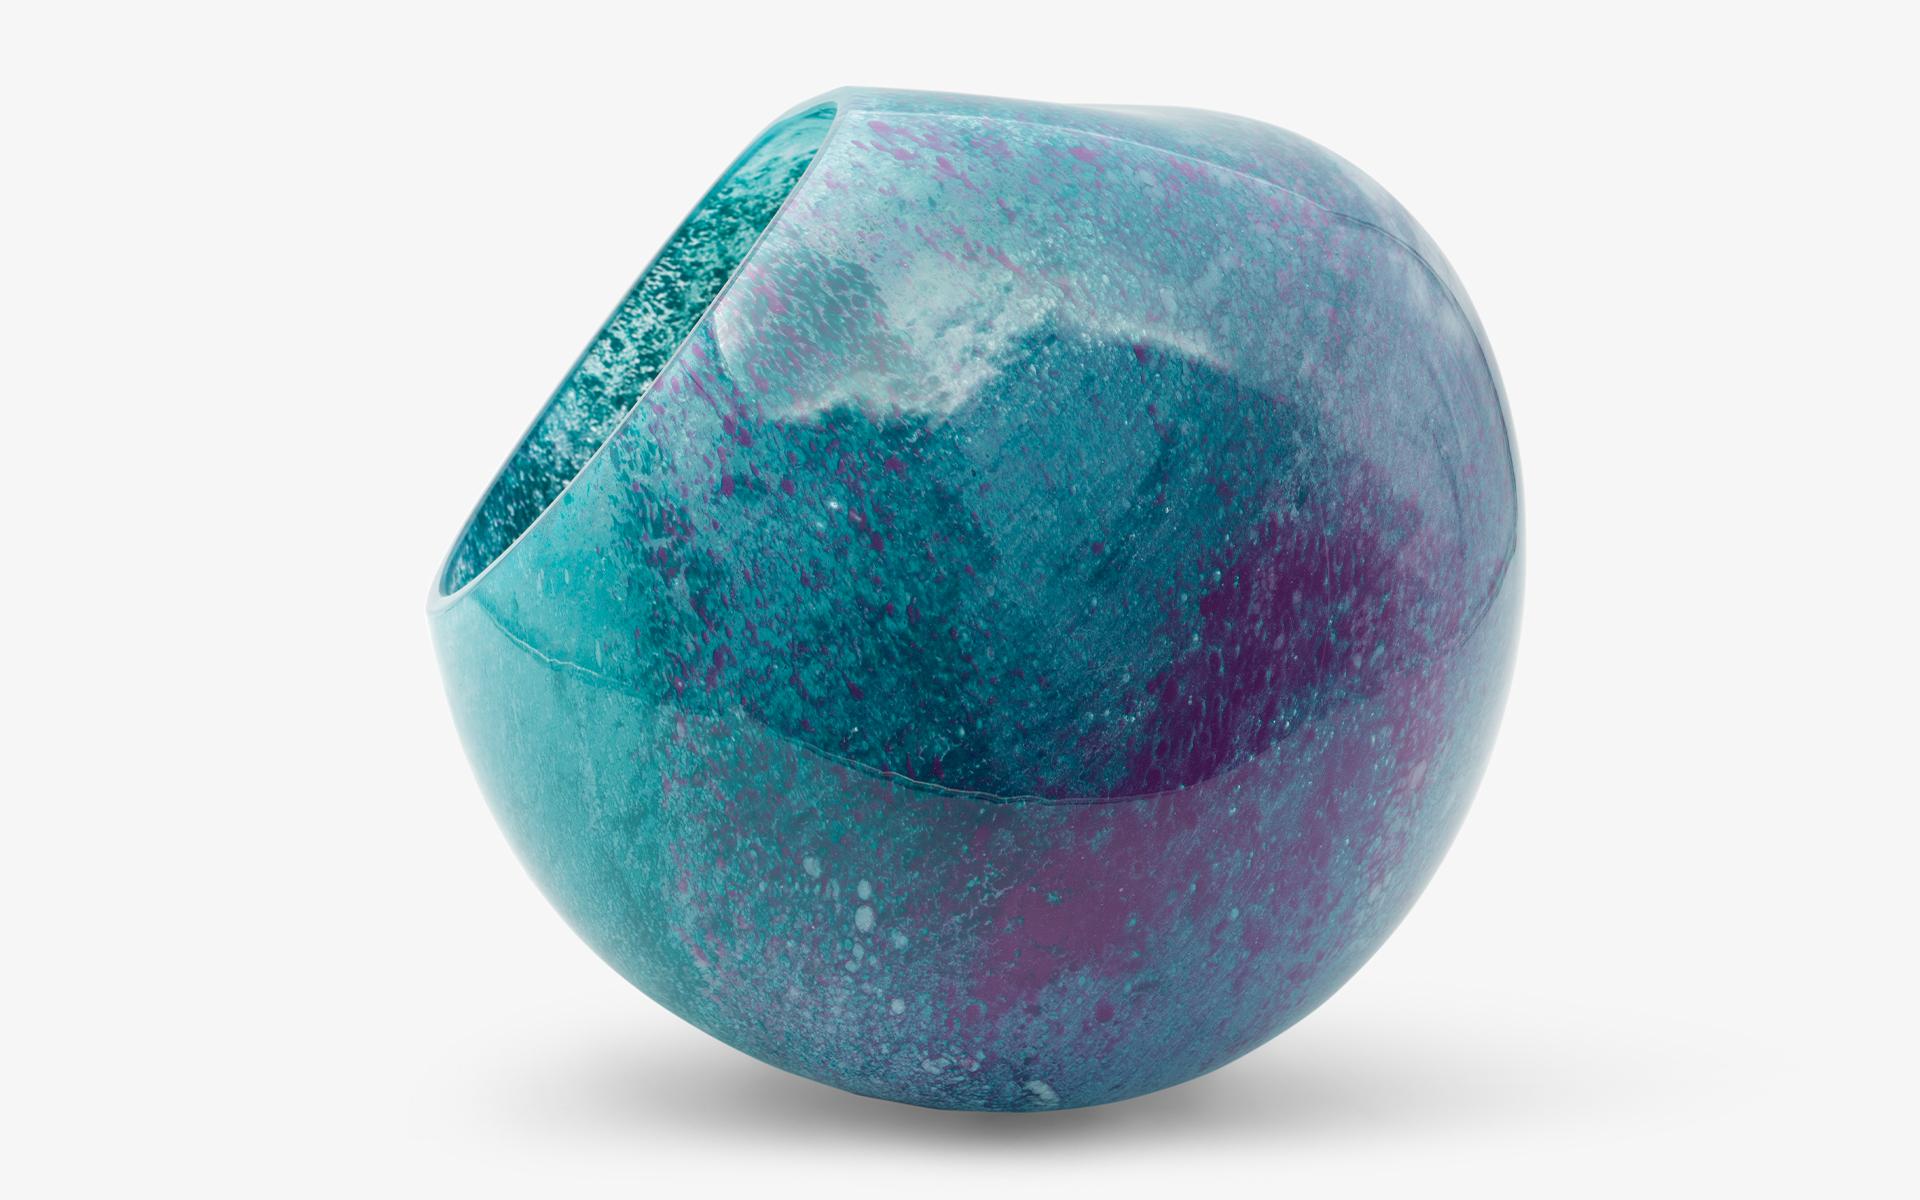 Hand-Crafted Turquoise and Lilac Color Amorphous Blown Glass Vase No:1